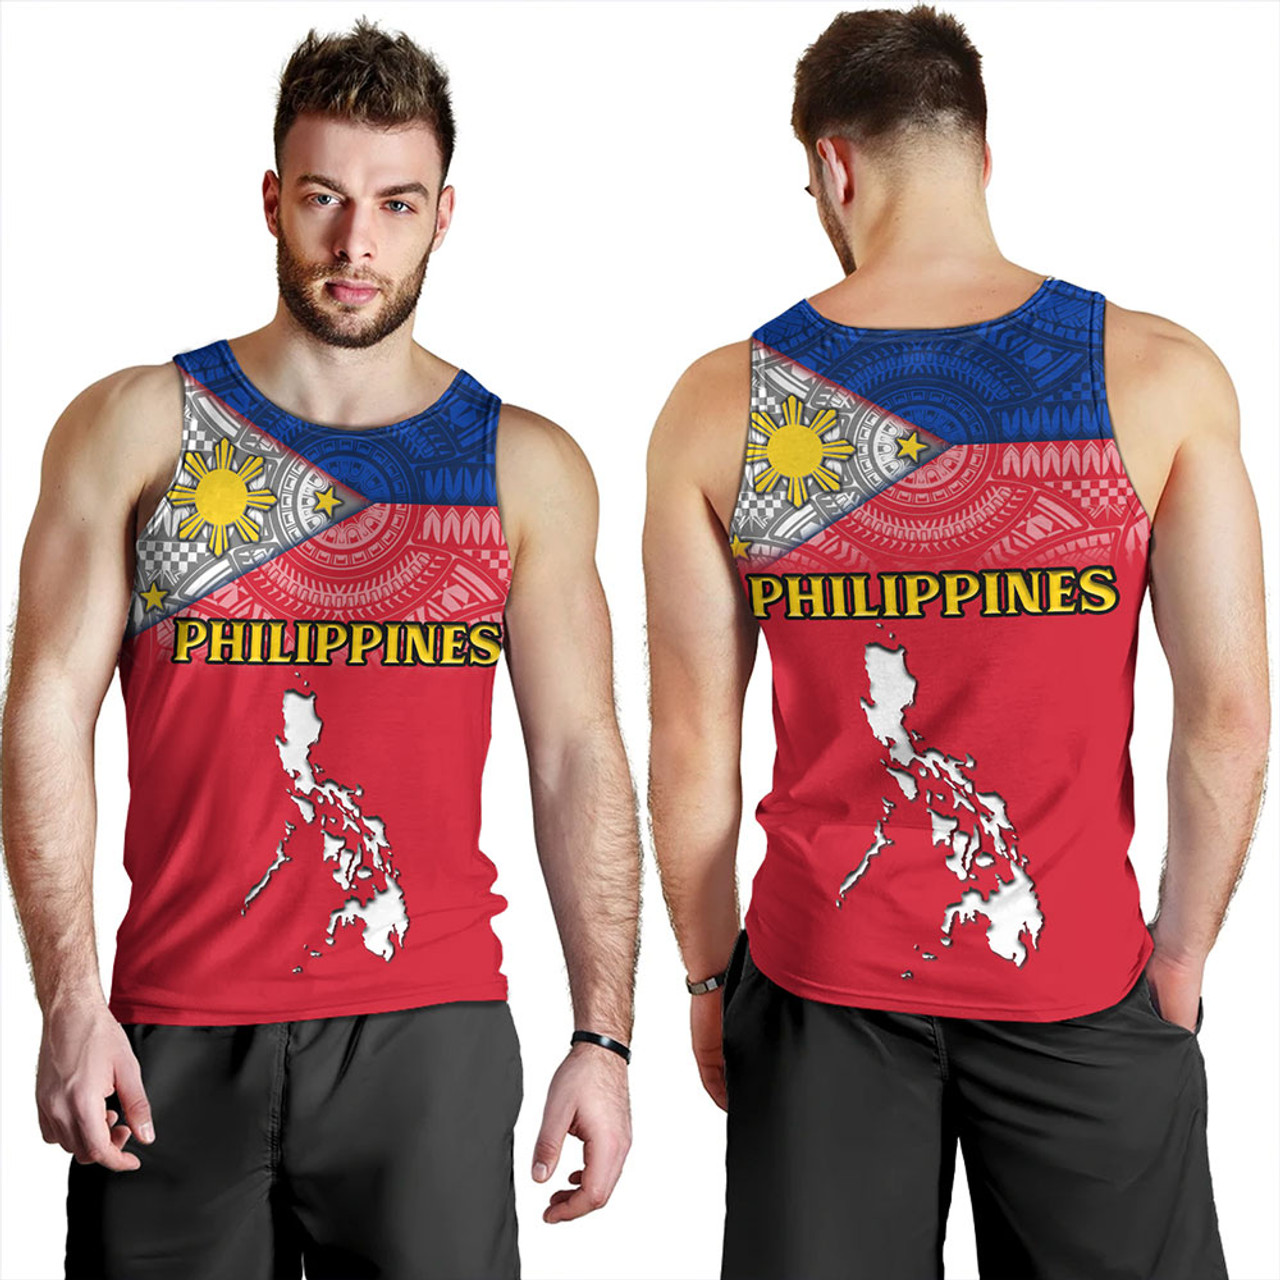 Philippines Tank Top - Philippines Map And Flag Color Style